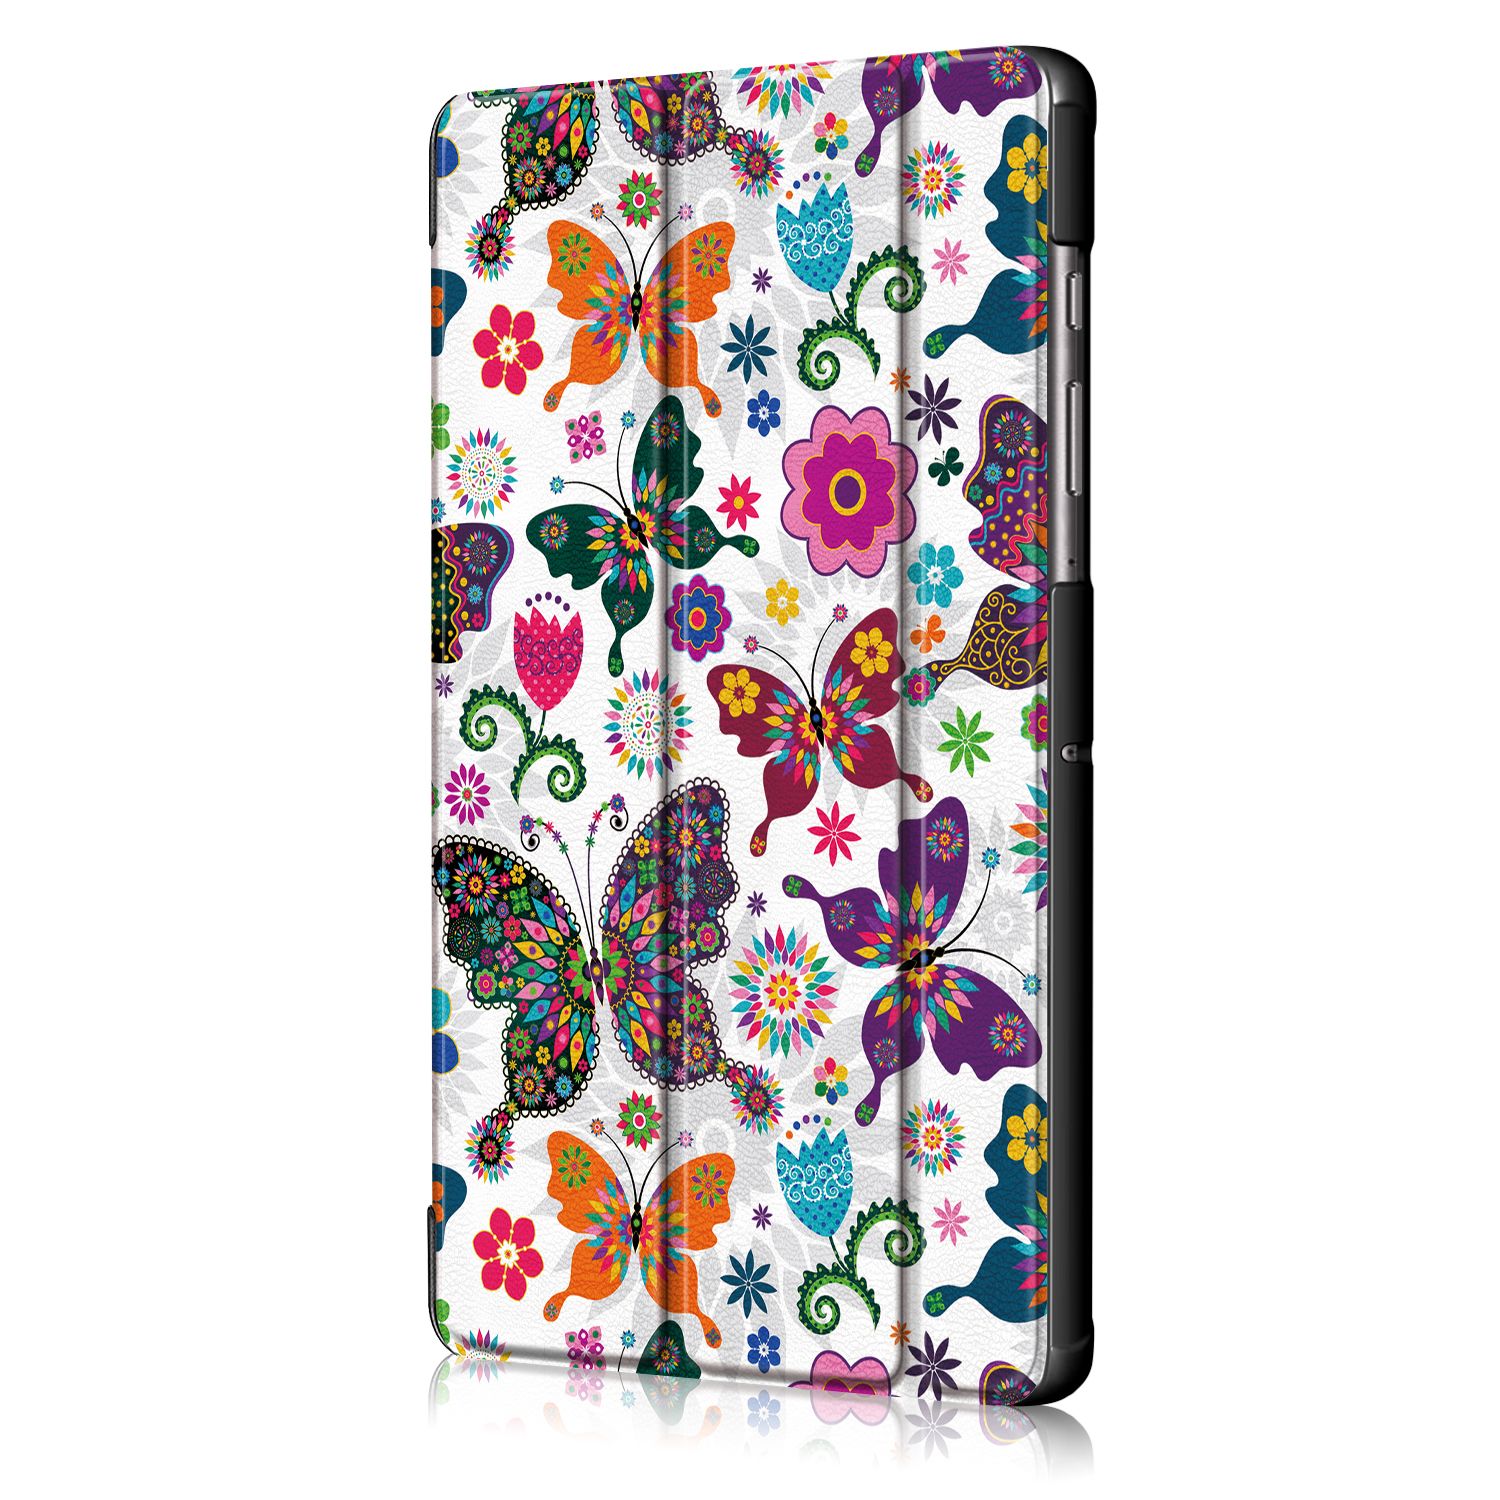 Printing-Tri-Fold-Tablet-Case-for-Samsung-Tab-S6-105---Butterfly-1556646